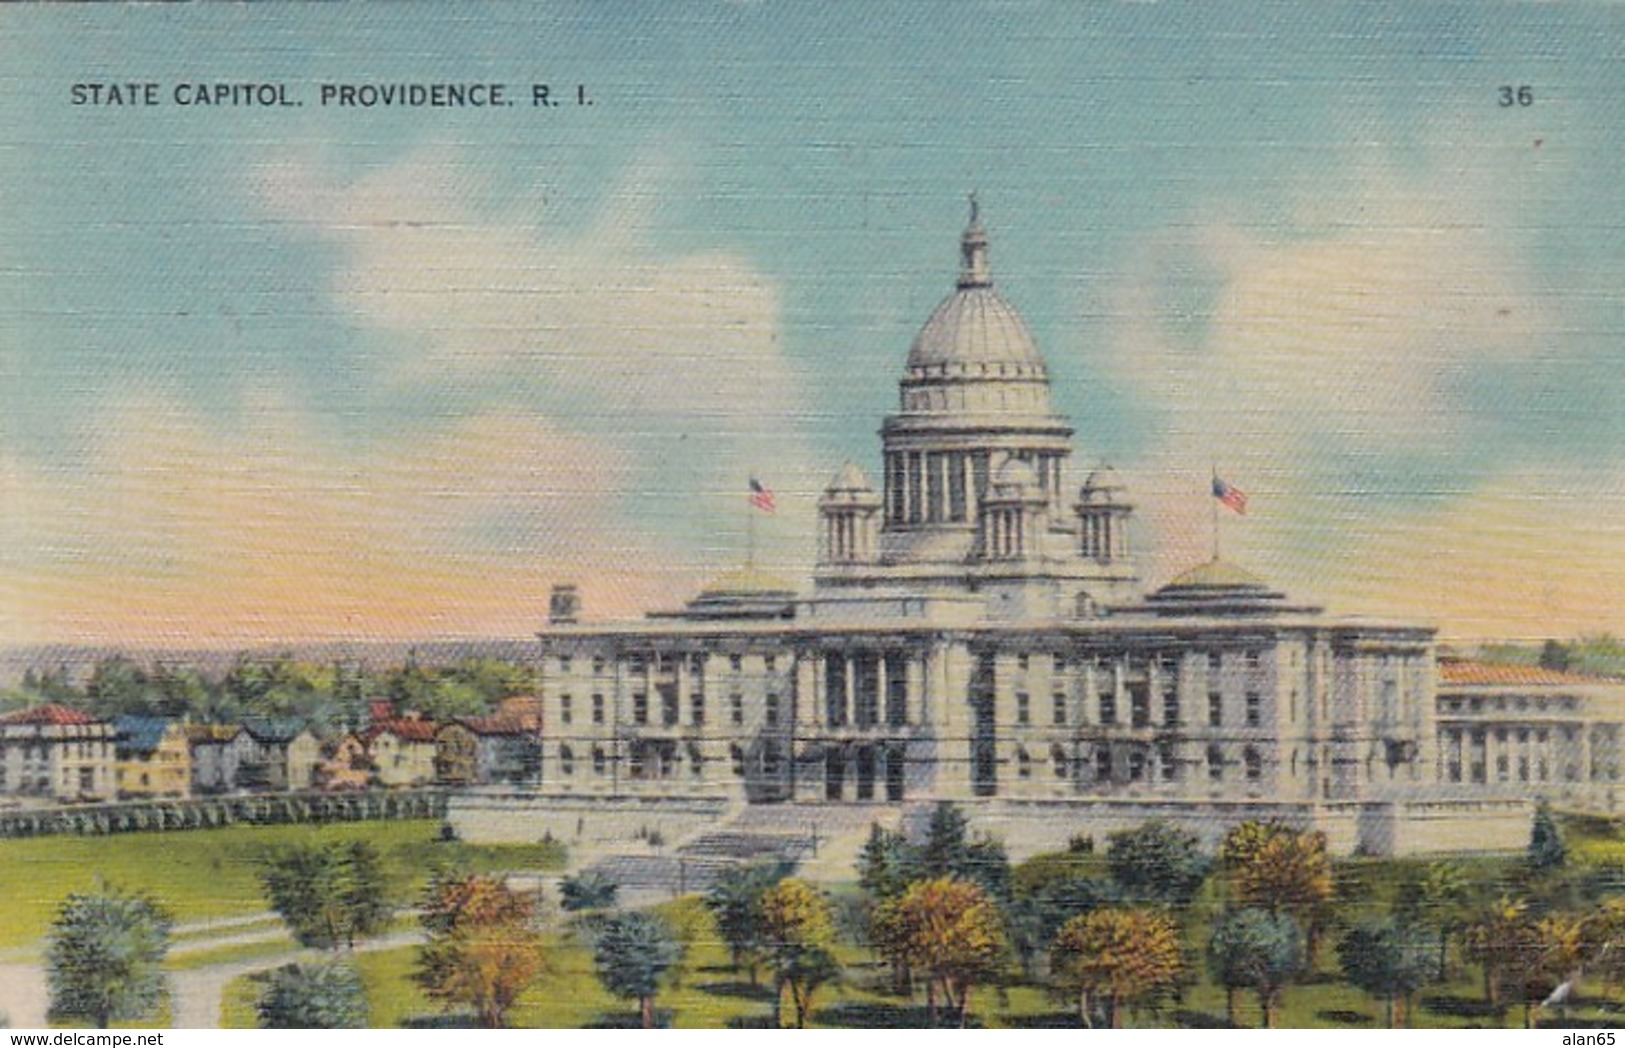 Providence Rhode Island, State Capitol Building, C1940s Postcard - Providence